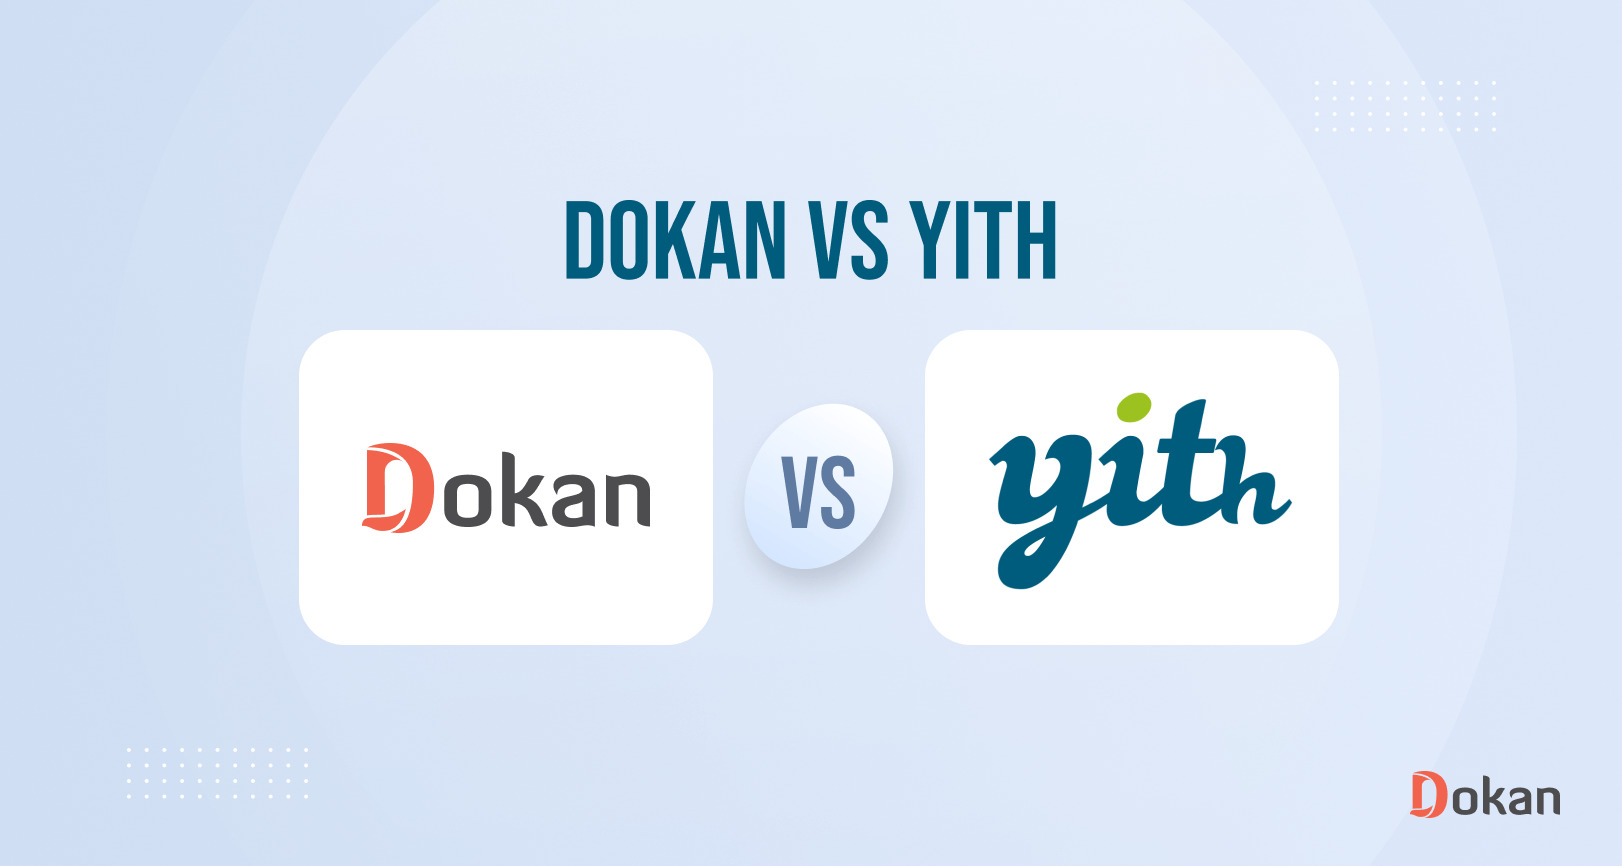 Feature images for Dokan vs YITH